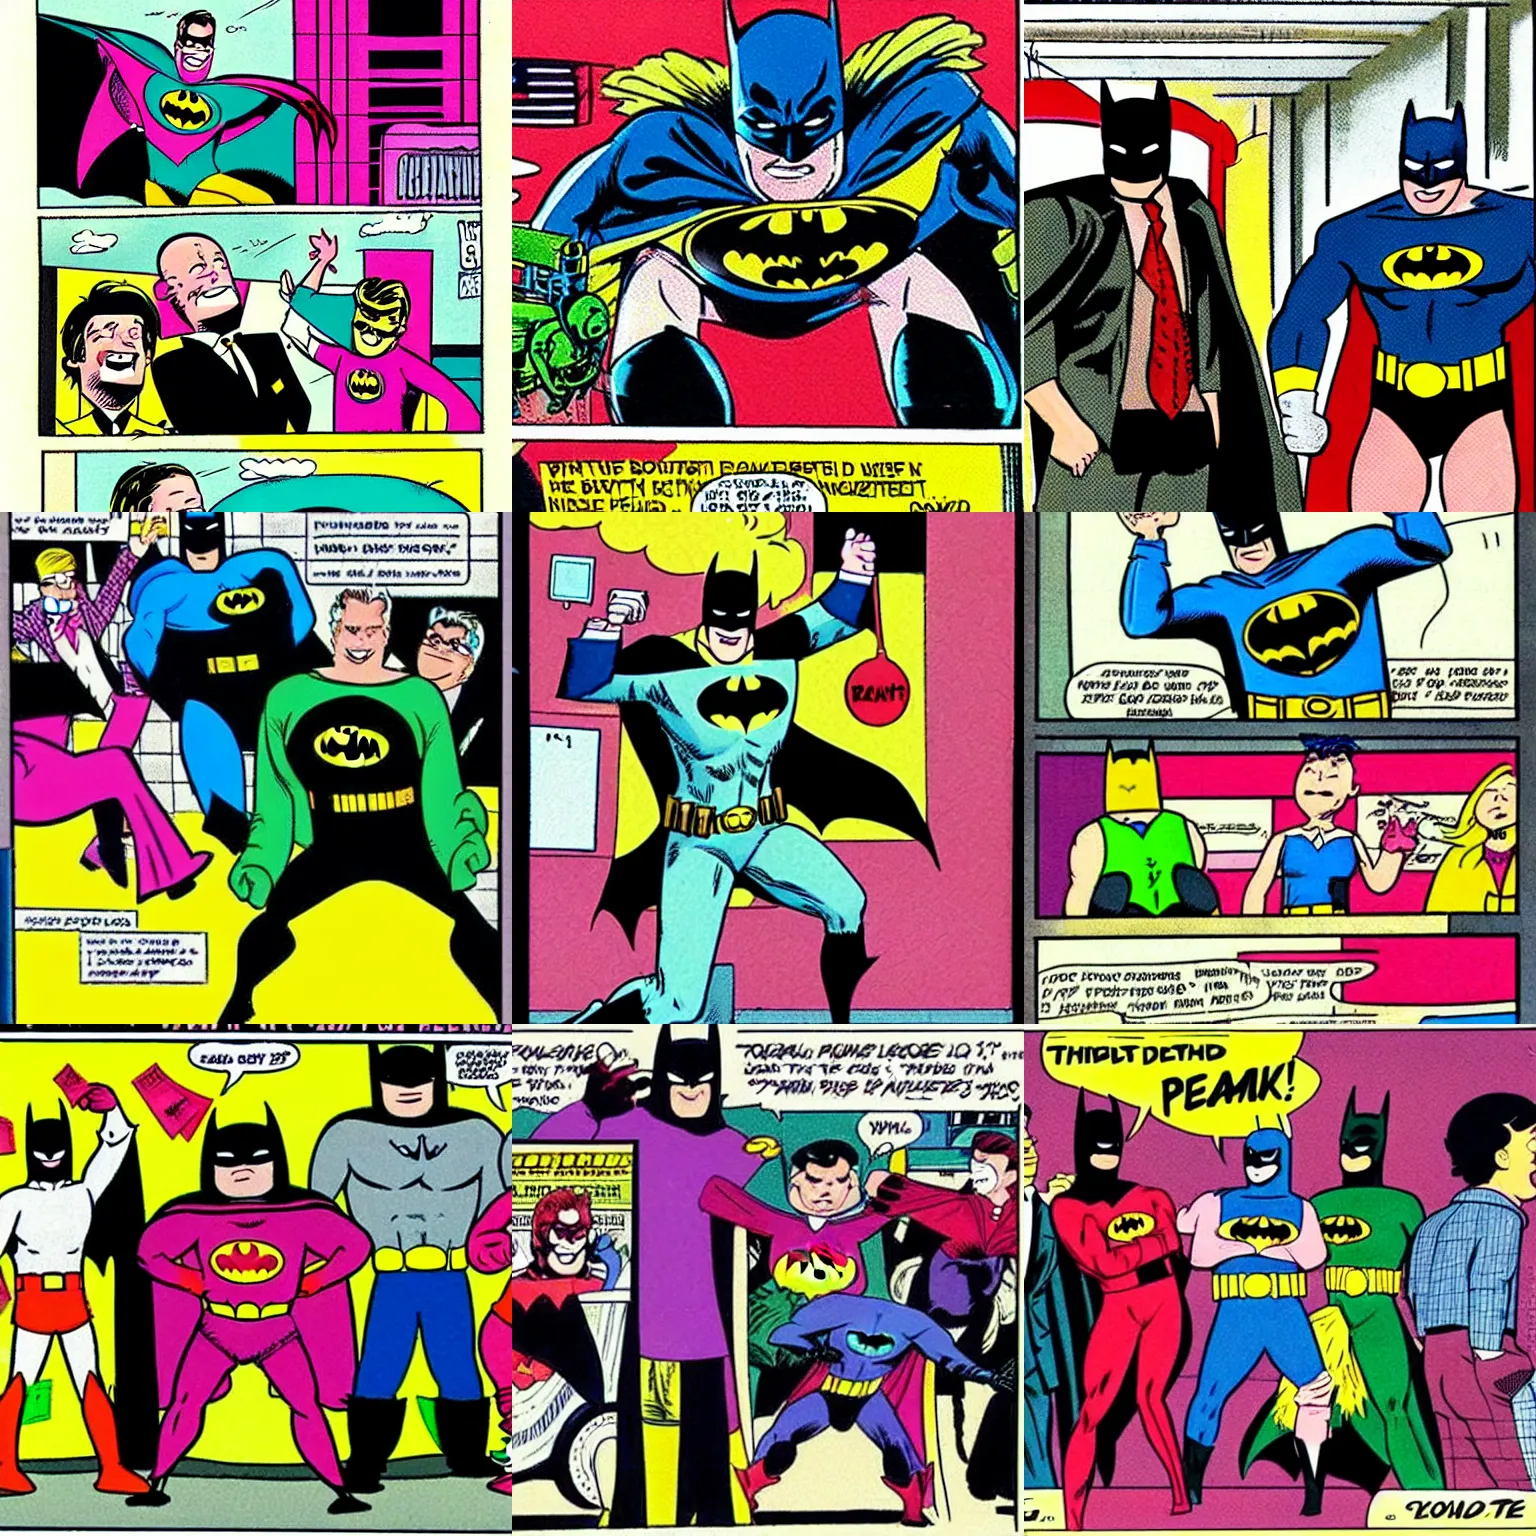 Prompt: Batman forgot to wear pants to the bank robbery, 1980s comic book panel, cartoon, colorful, embarrassing, funny, criminals laughing